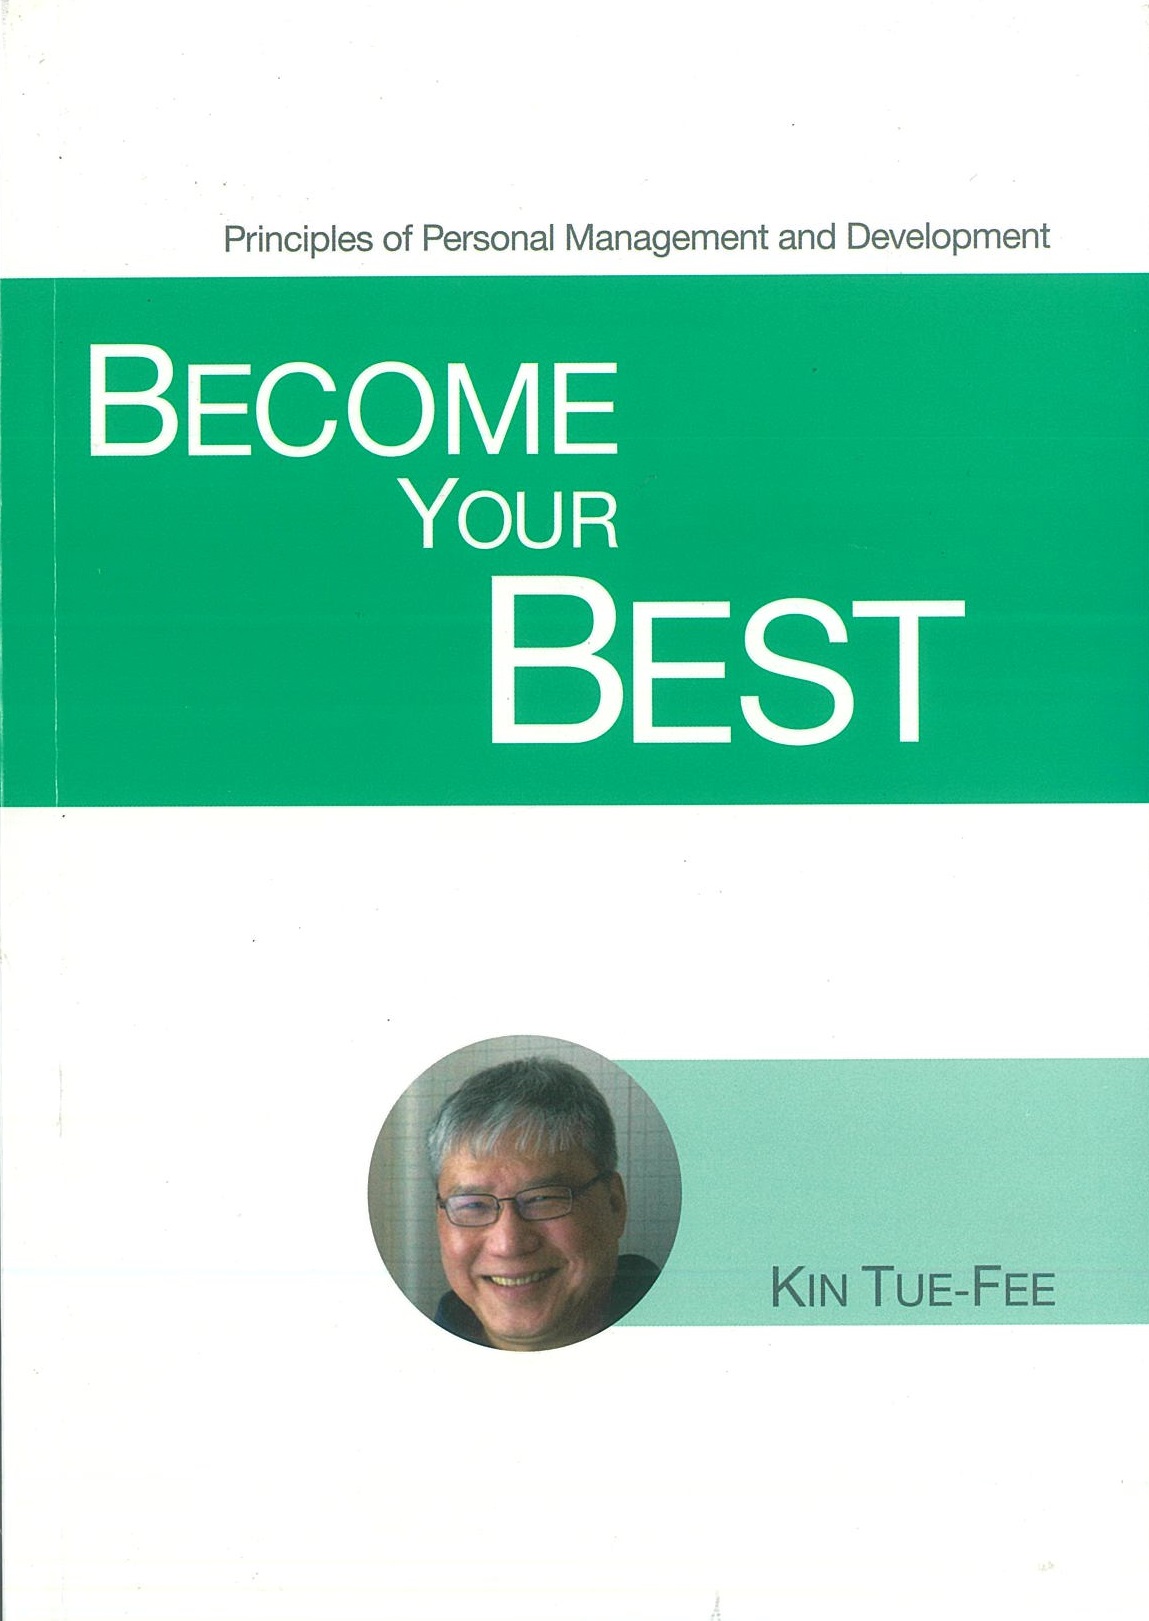 BECOME YOUR BEST - KIN TUE-FEE